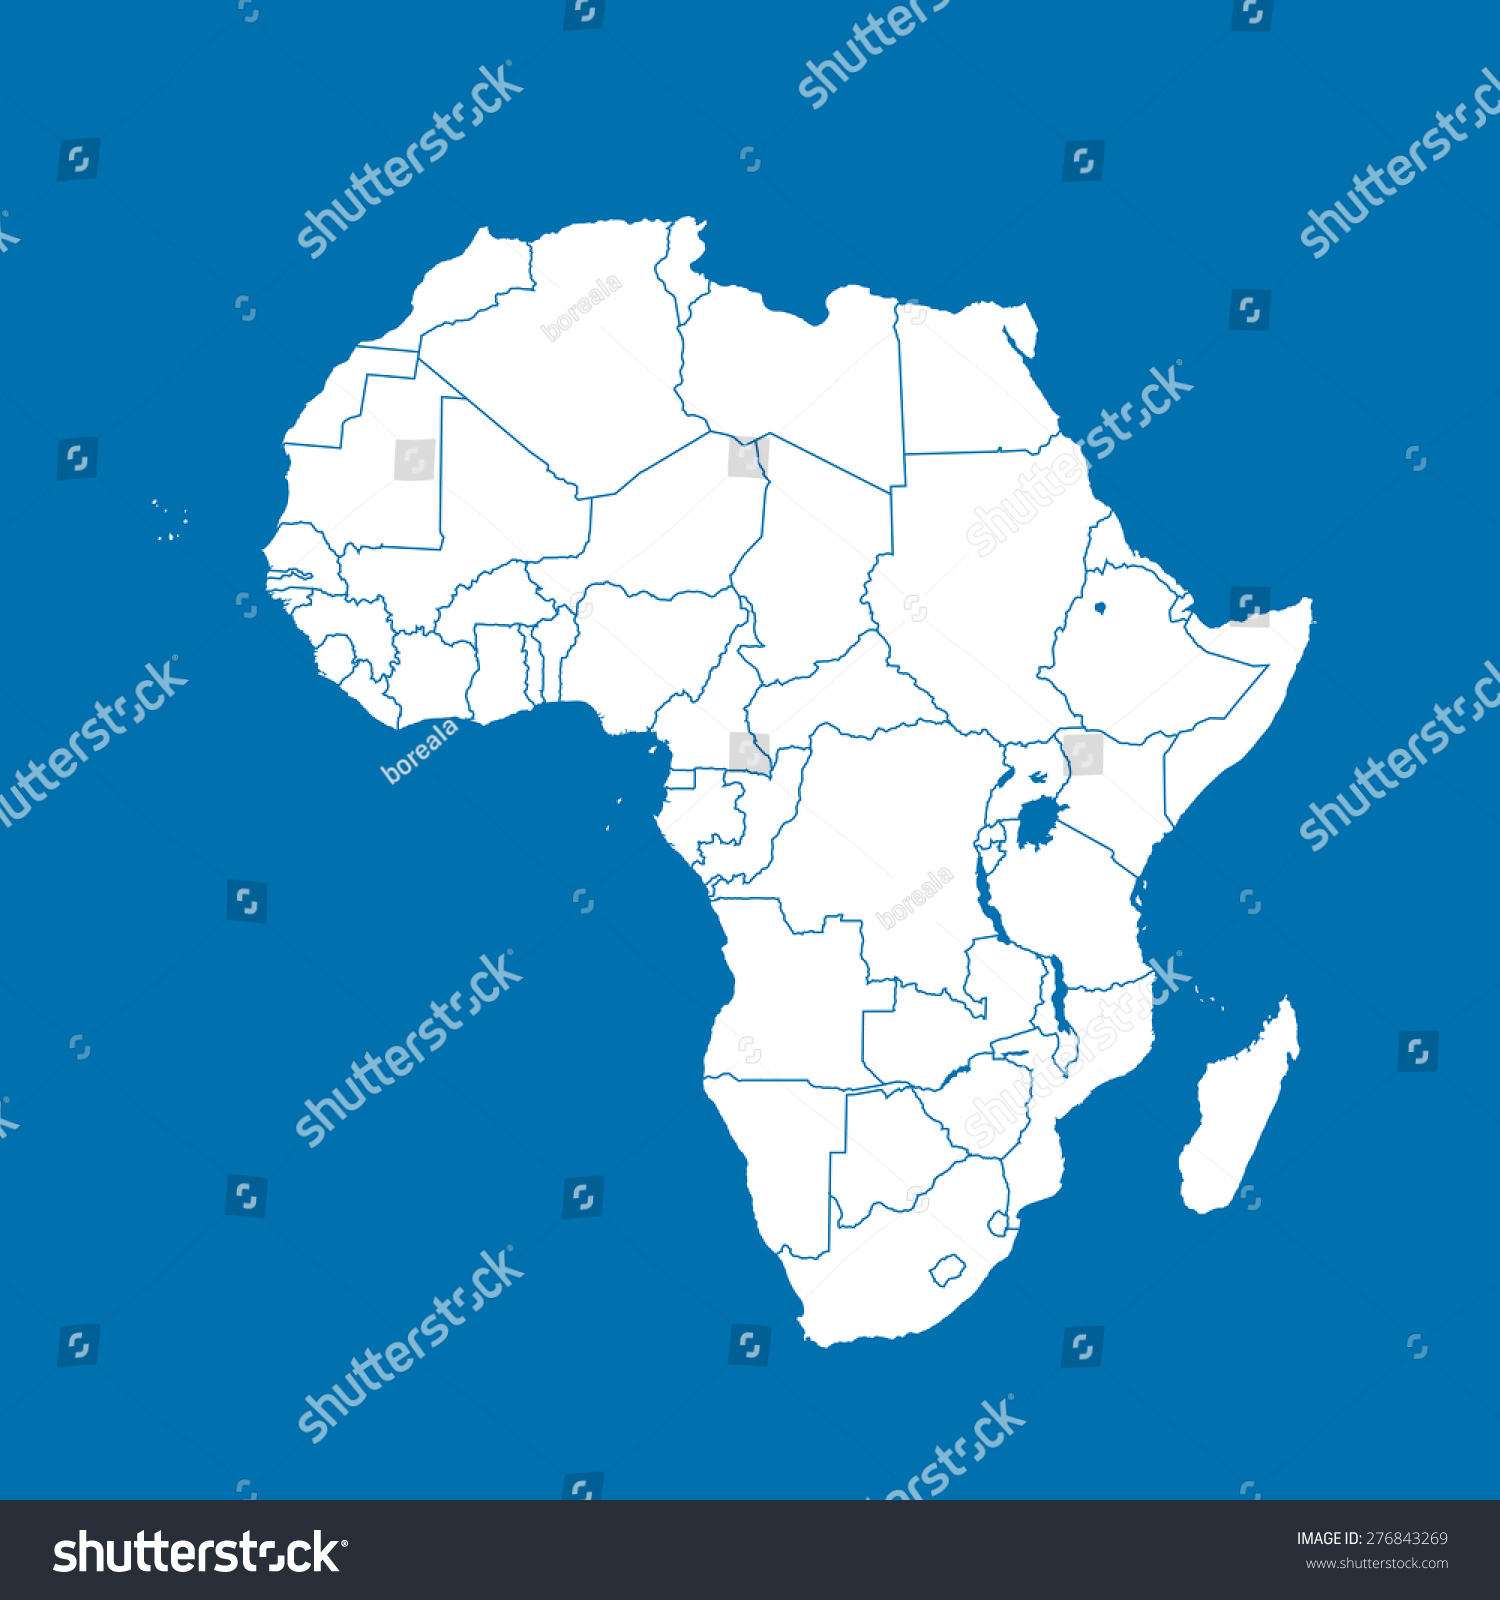 Map Of Africa Royalty Free Stock Vector 276843269 7485